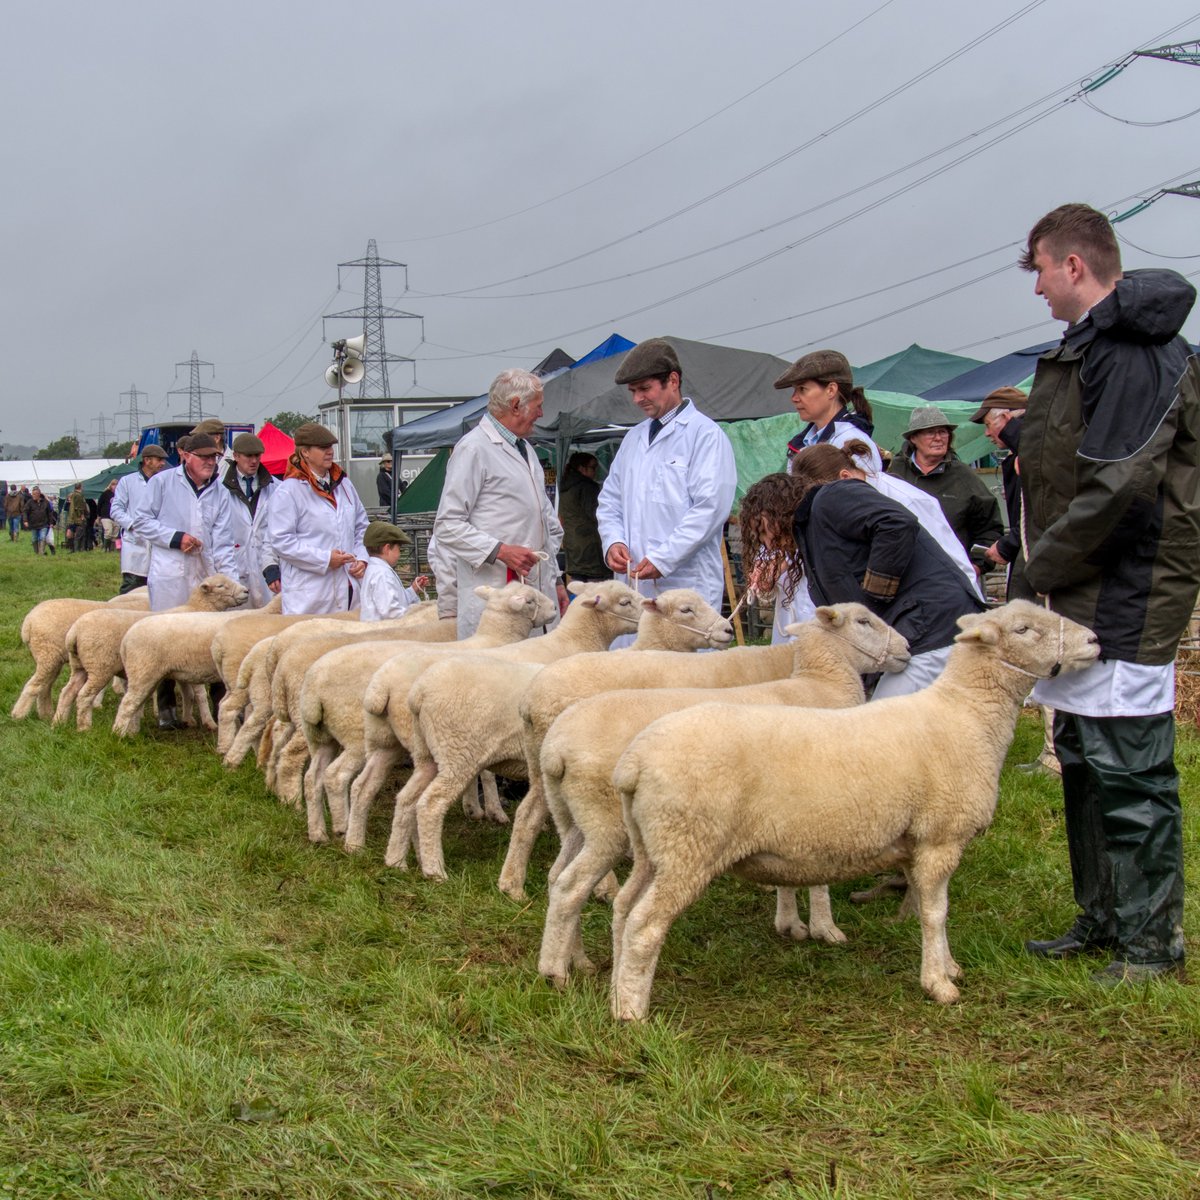 Will you be going to the North Devon Show this year? Tickets are now available to purchase from the Museum shop, so pop by to get yours, ready for Wednesday 7th August. Adult: £18 Child: £3 - 4 years and under are free Family: £38 - 2 Adult, 3 Children 5-15yrs @northdevonshow